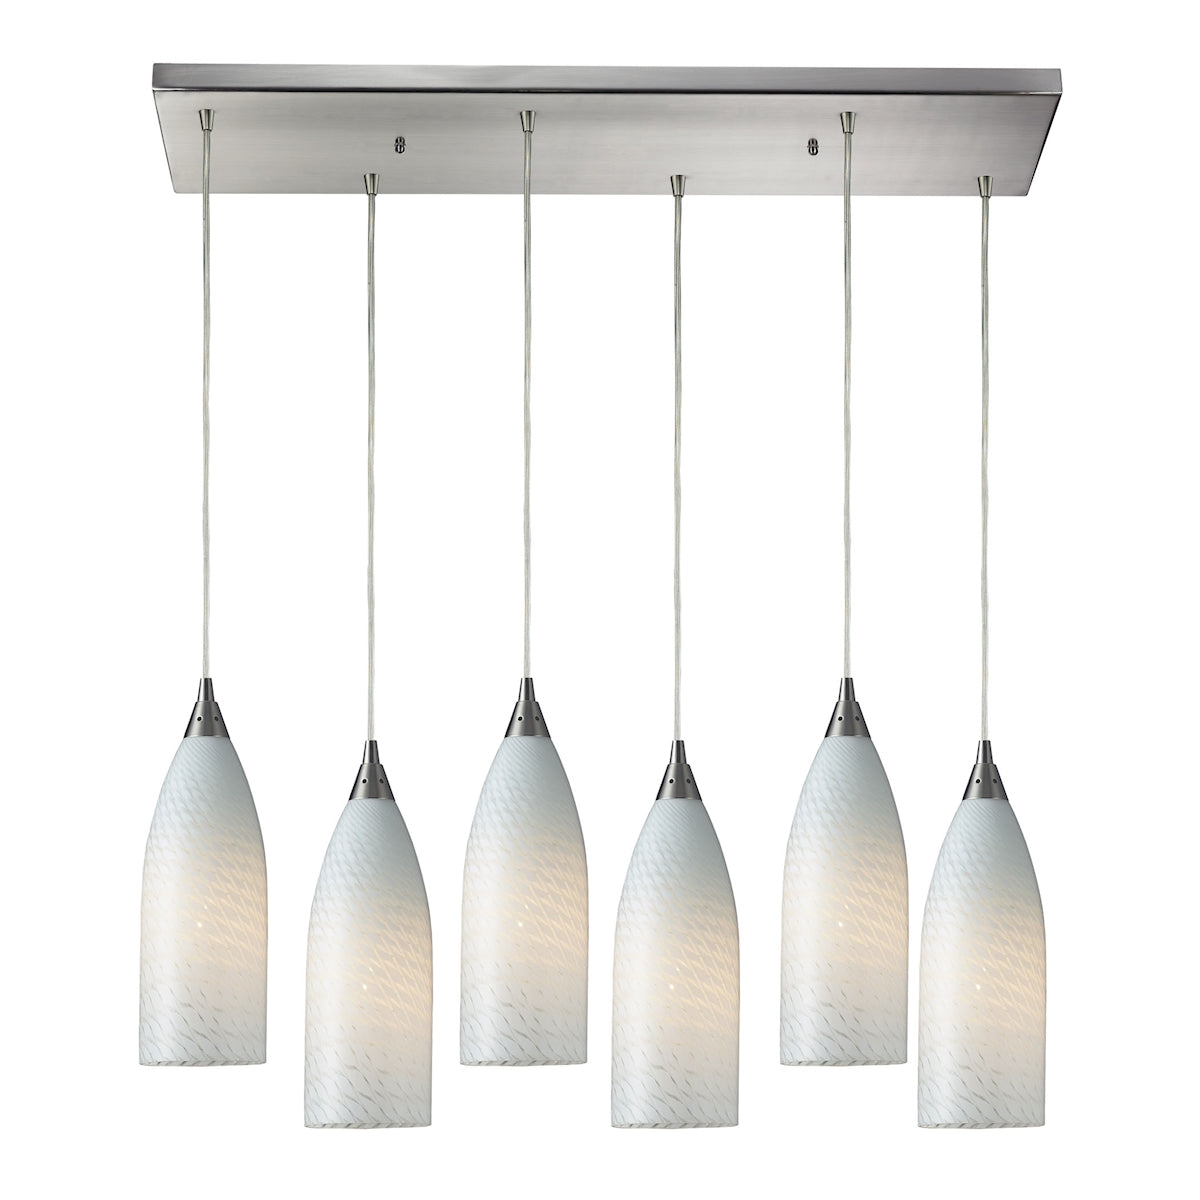 ELK Lighting 522-6RC-WS Cilindro 6-Light Rectangular Pendant Fixture in Satin Nickel with White Glass